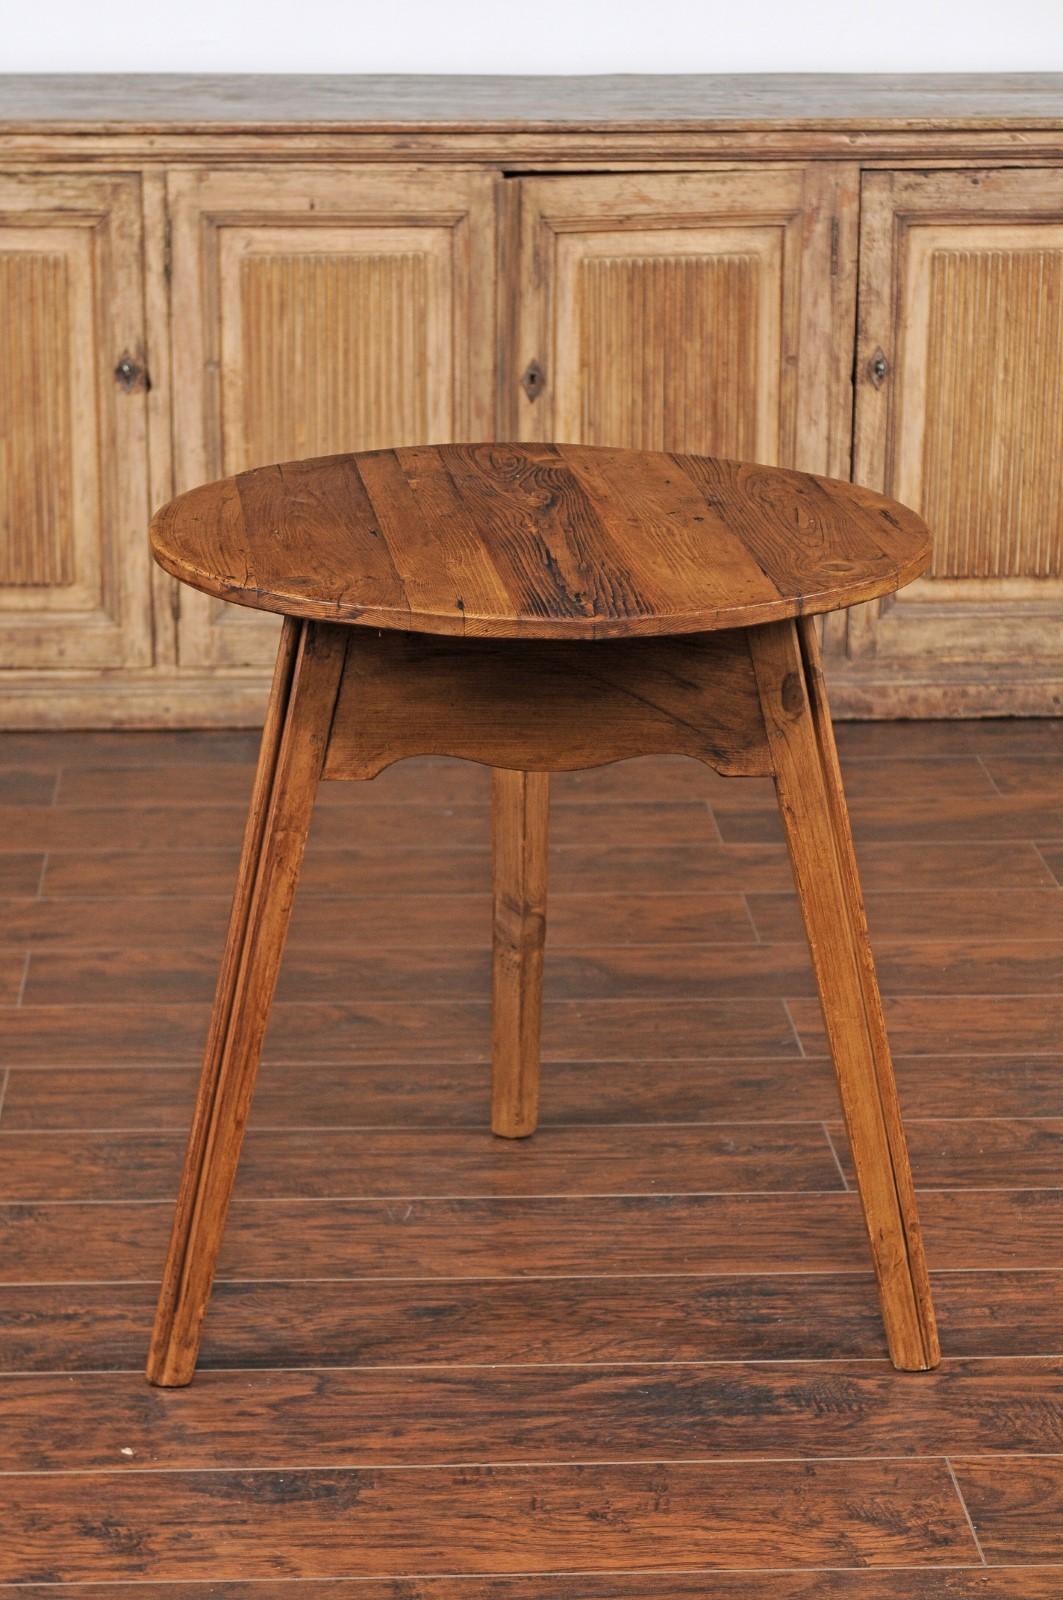 English Turn of the Century Pine Cricket Table with Scalloped Apron, circa 1900 For Sale 4